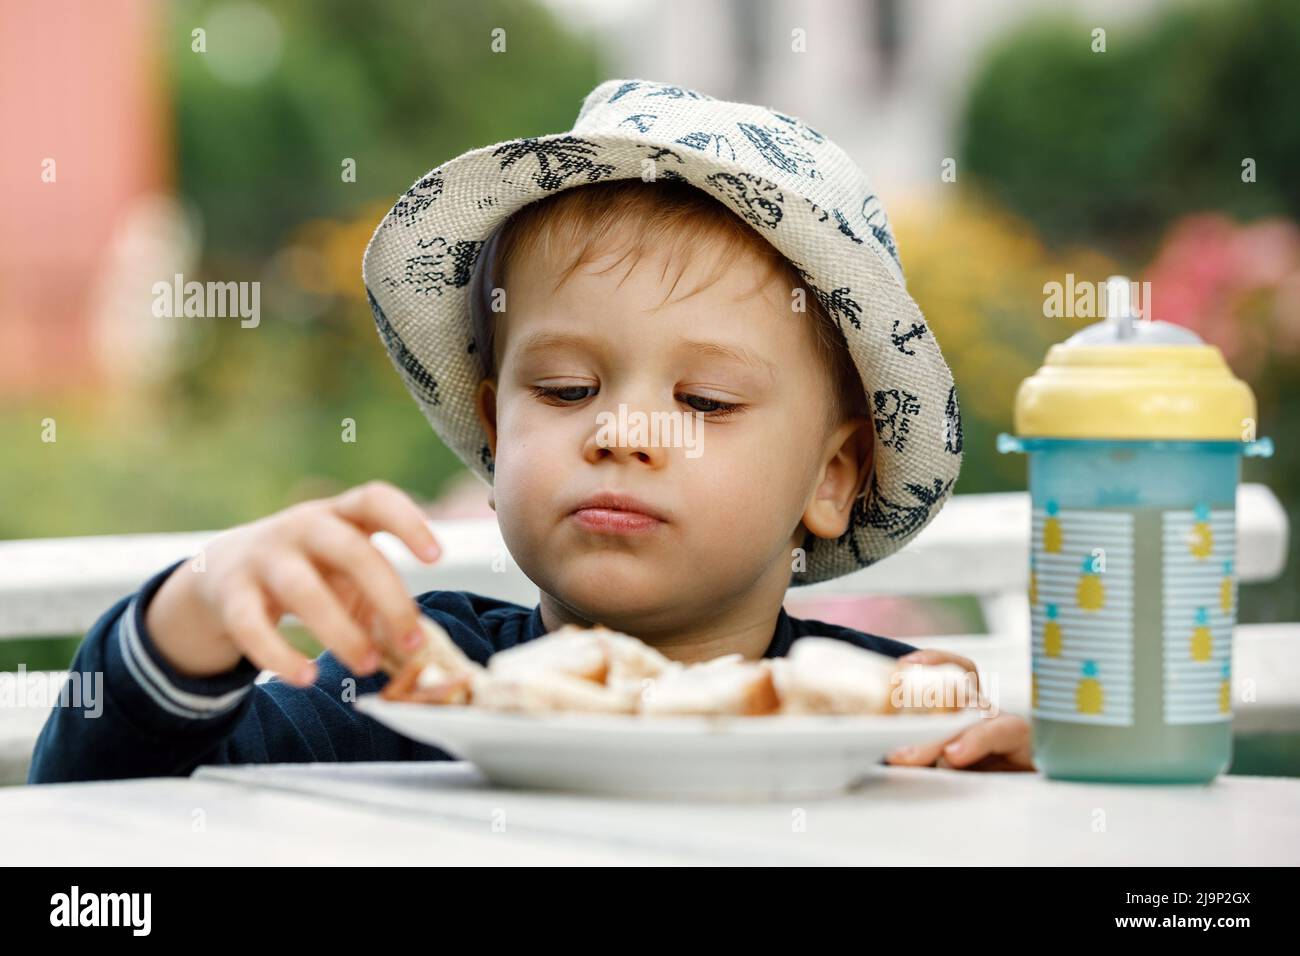 The boy eats toast for breakfast with juice in the background of a summer garden. A plastic cup with pineapple juice on the table. Stock Photo